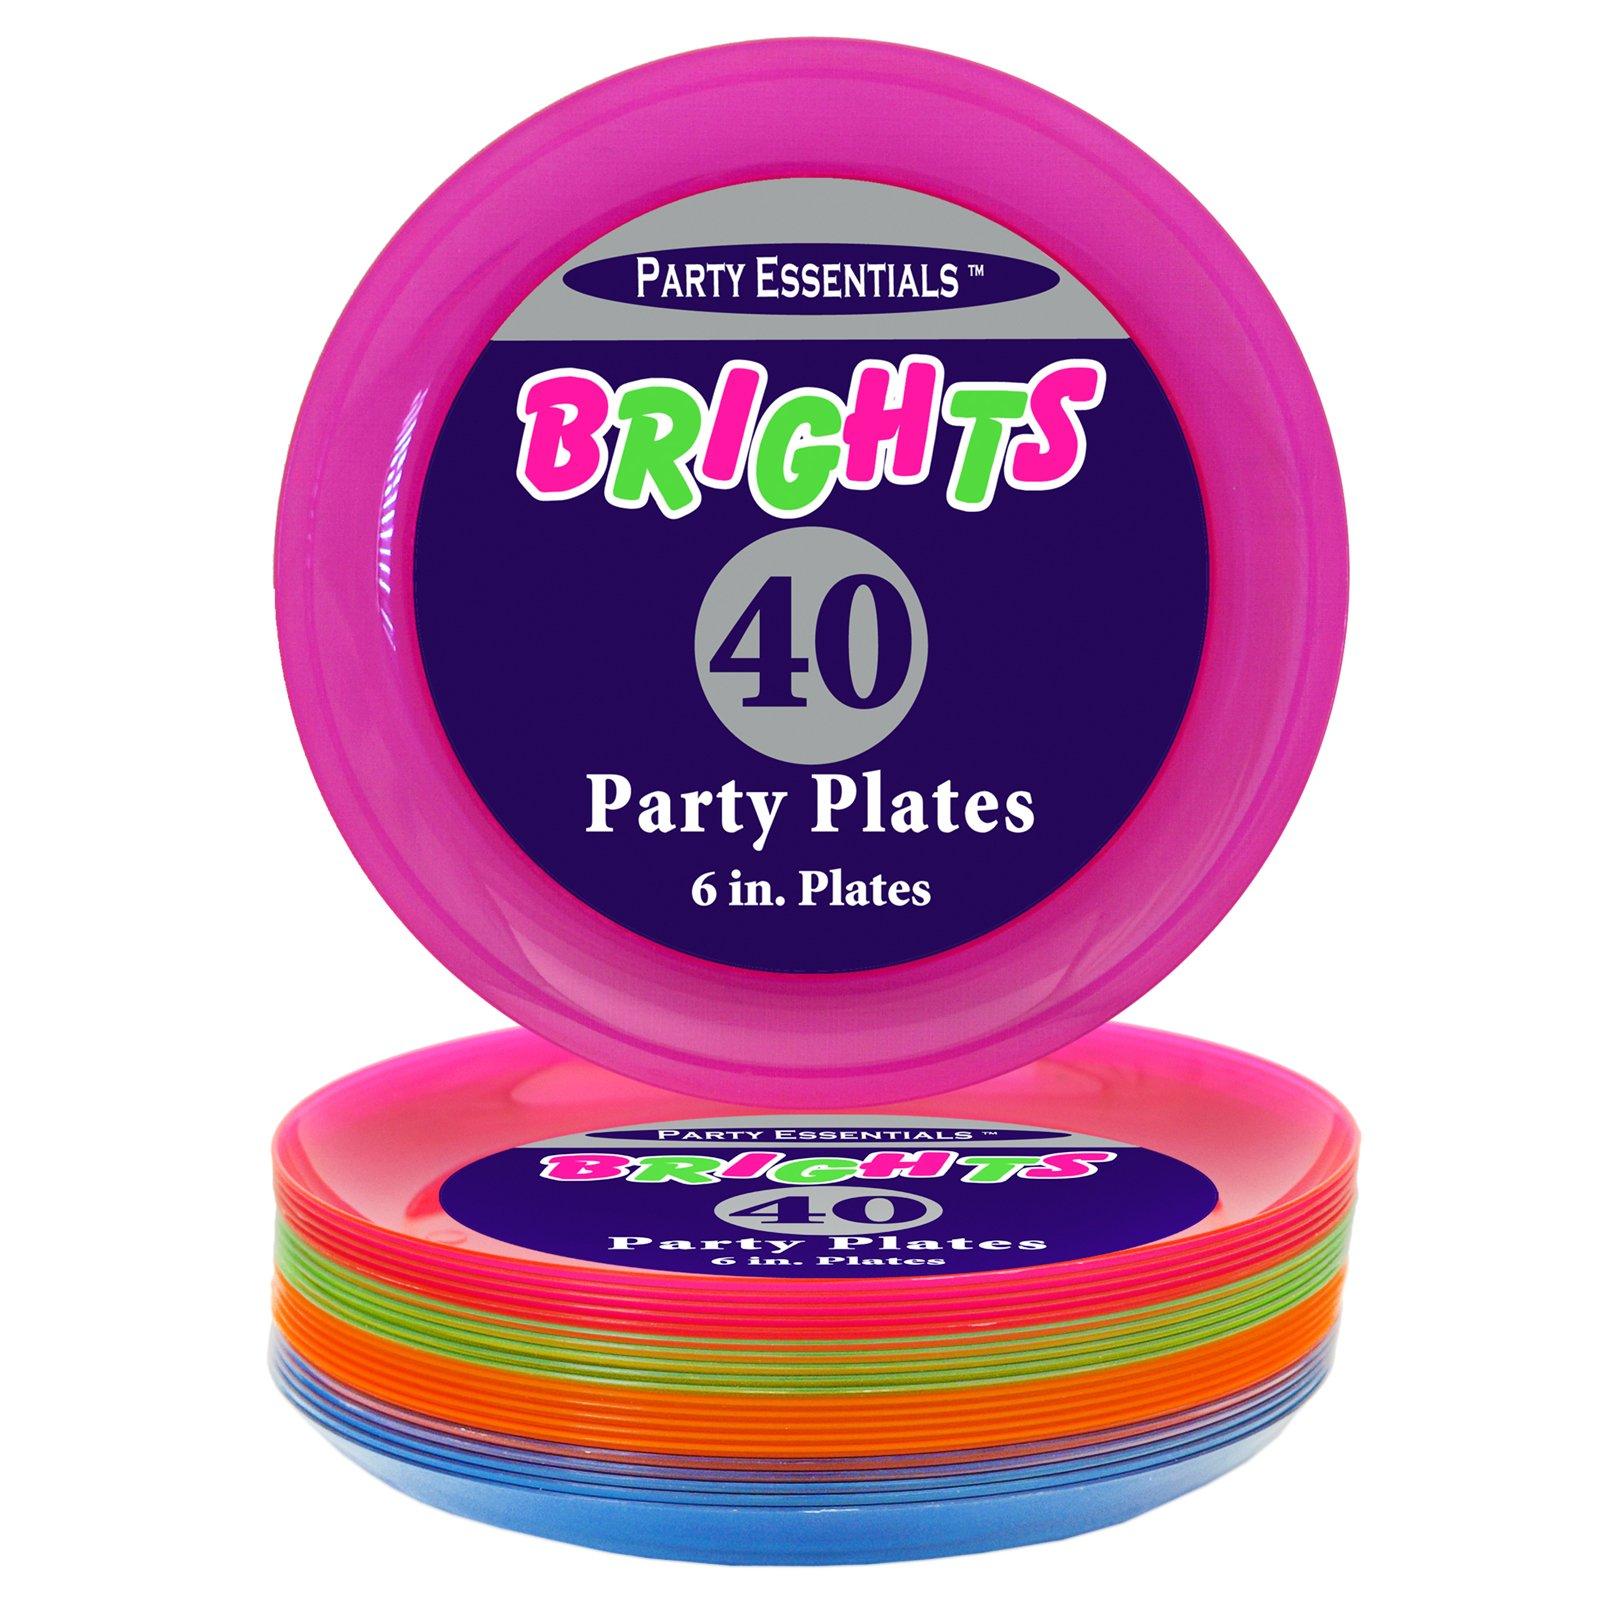 Neon Plate. 9 Plates. Party round